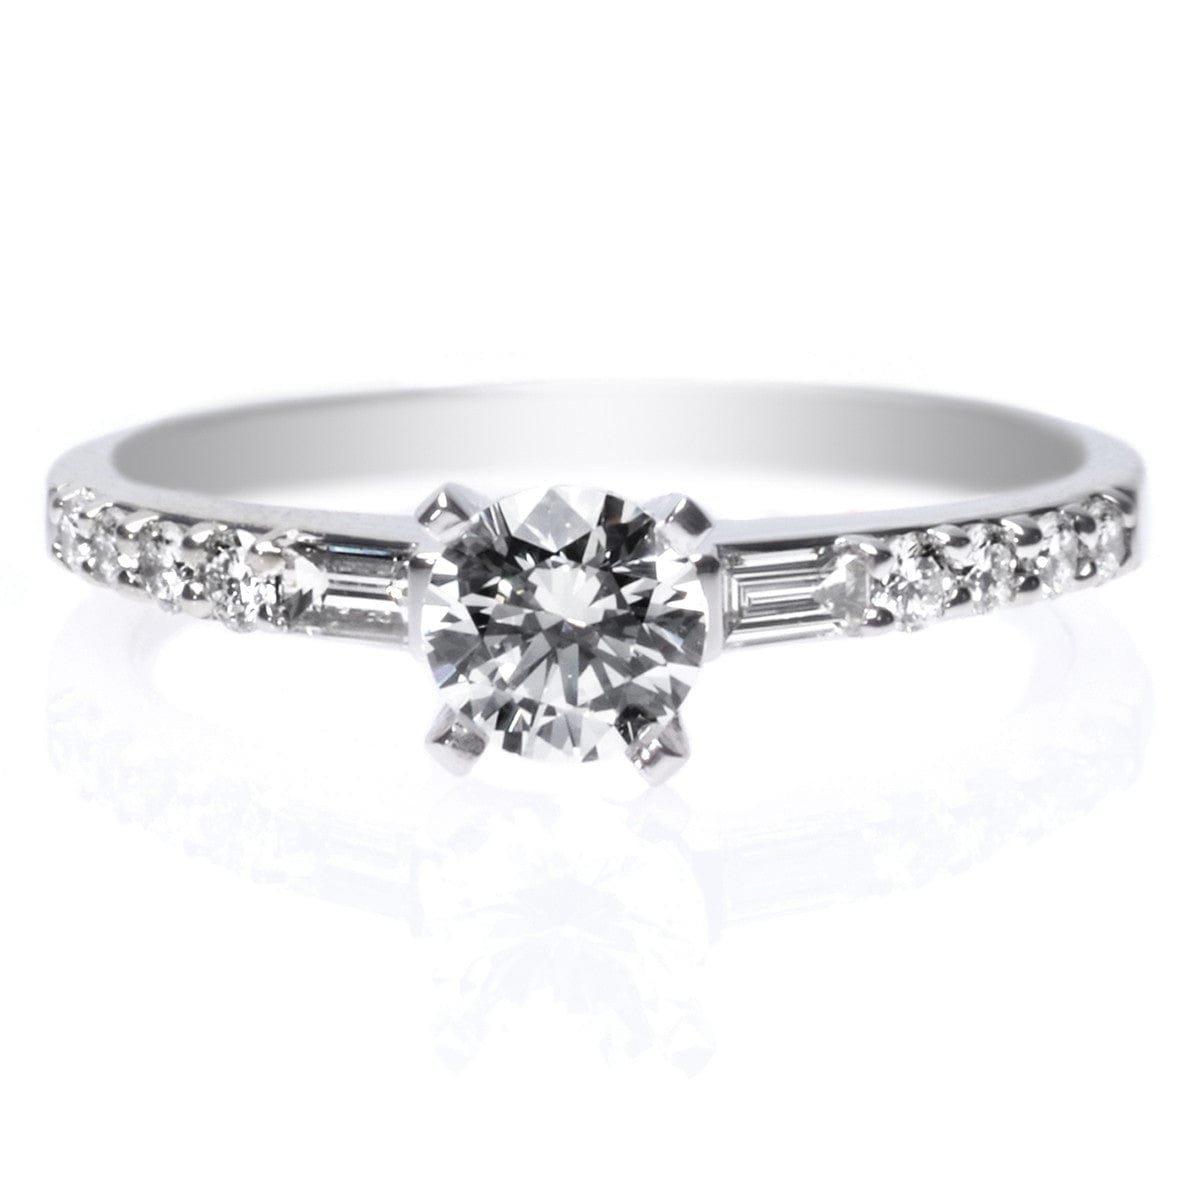 18K White Gold Baguette and Round Cut Diamond Engagement Ring